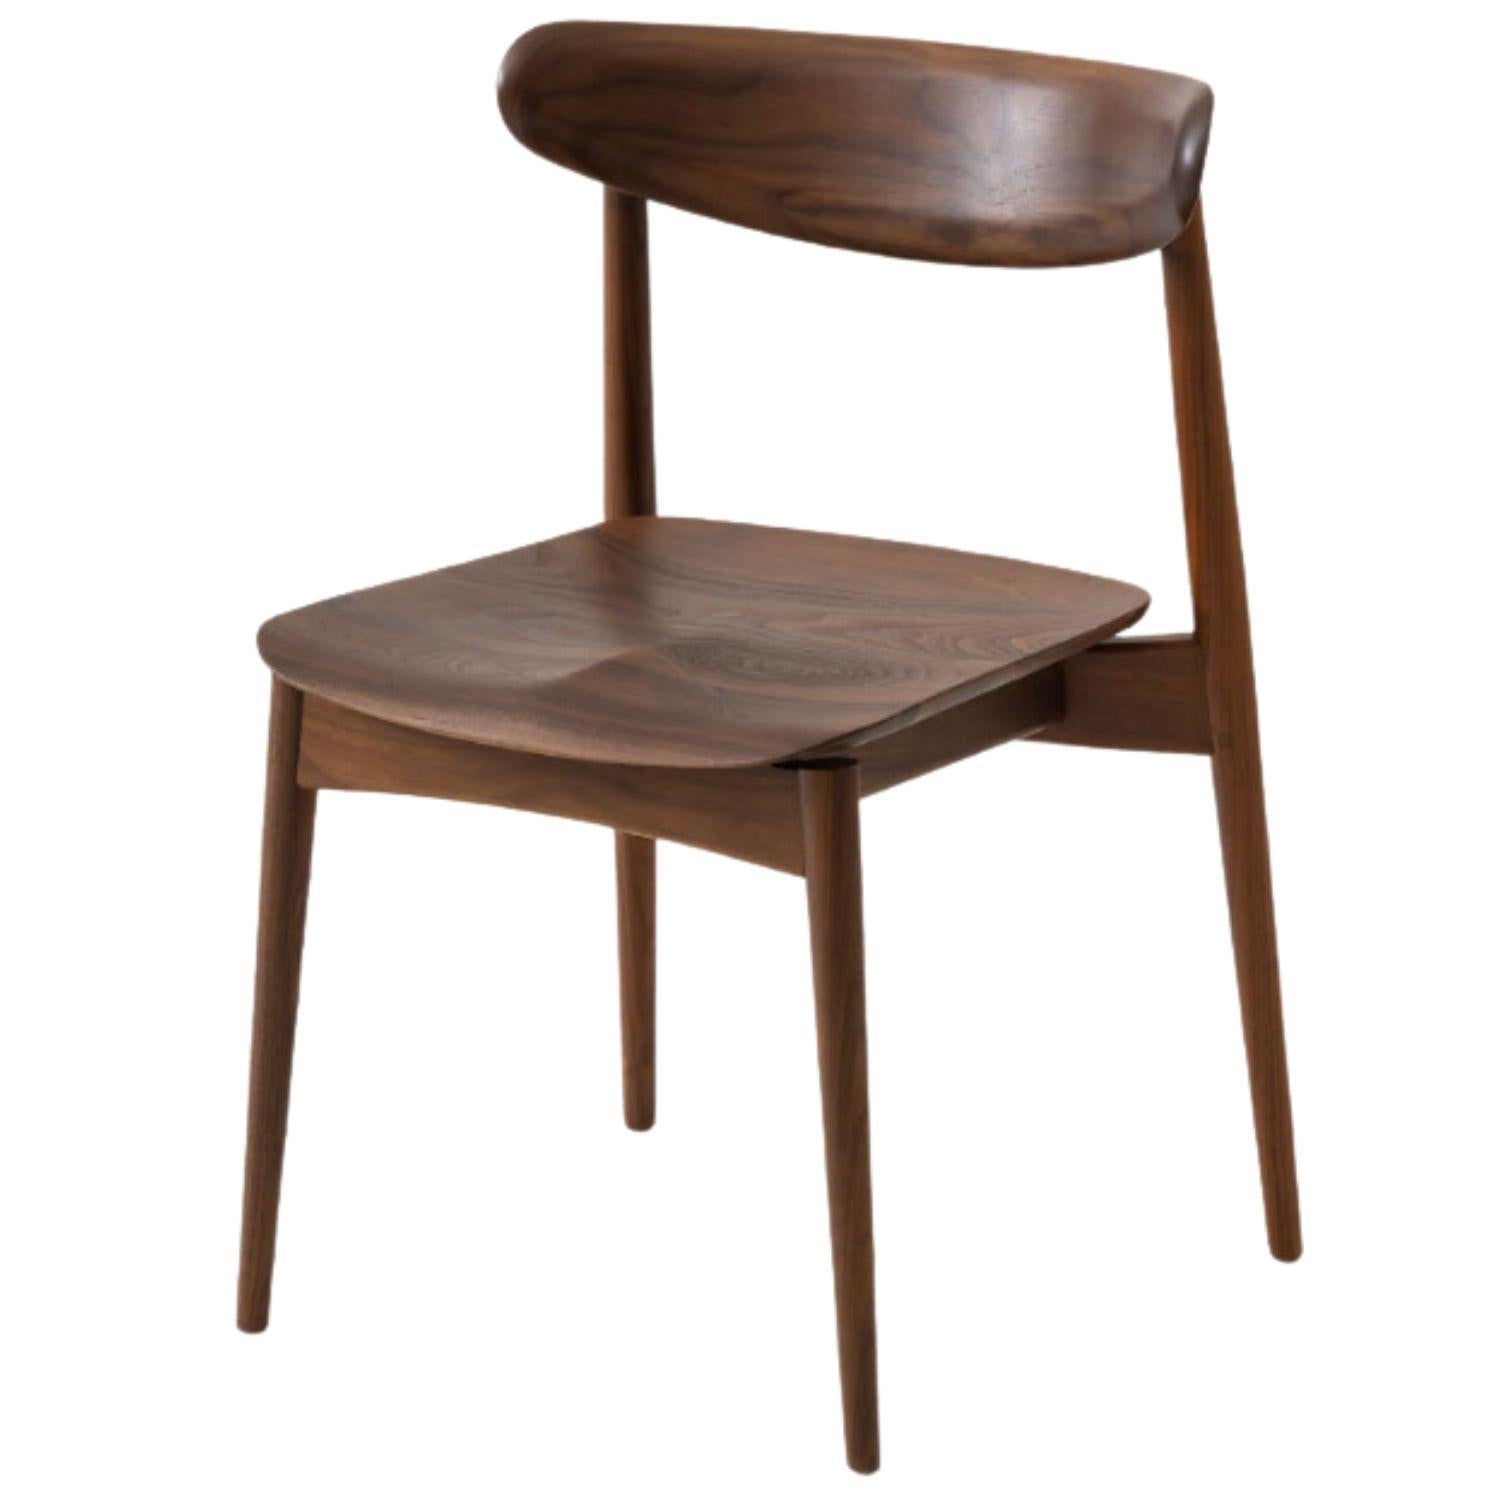 Motomi Kawakami 'Seoto KD201' Dining Chair in Oak and Upholstery for Hida For Sale 1